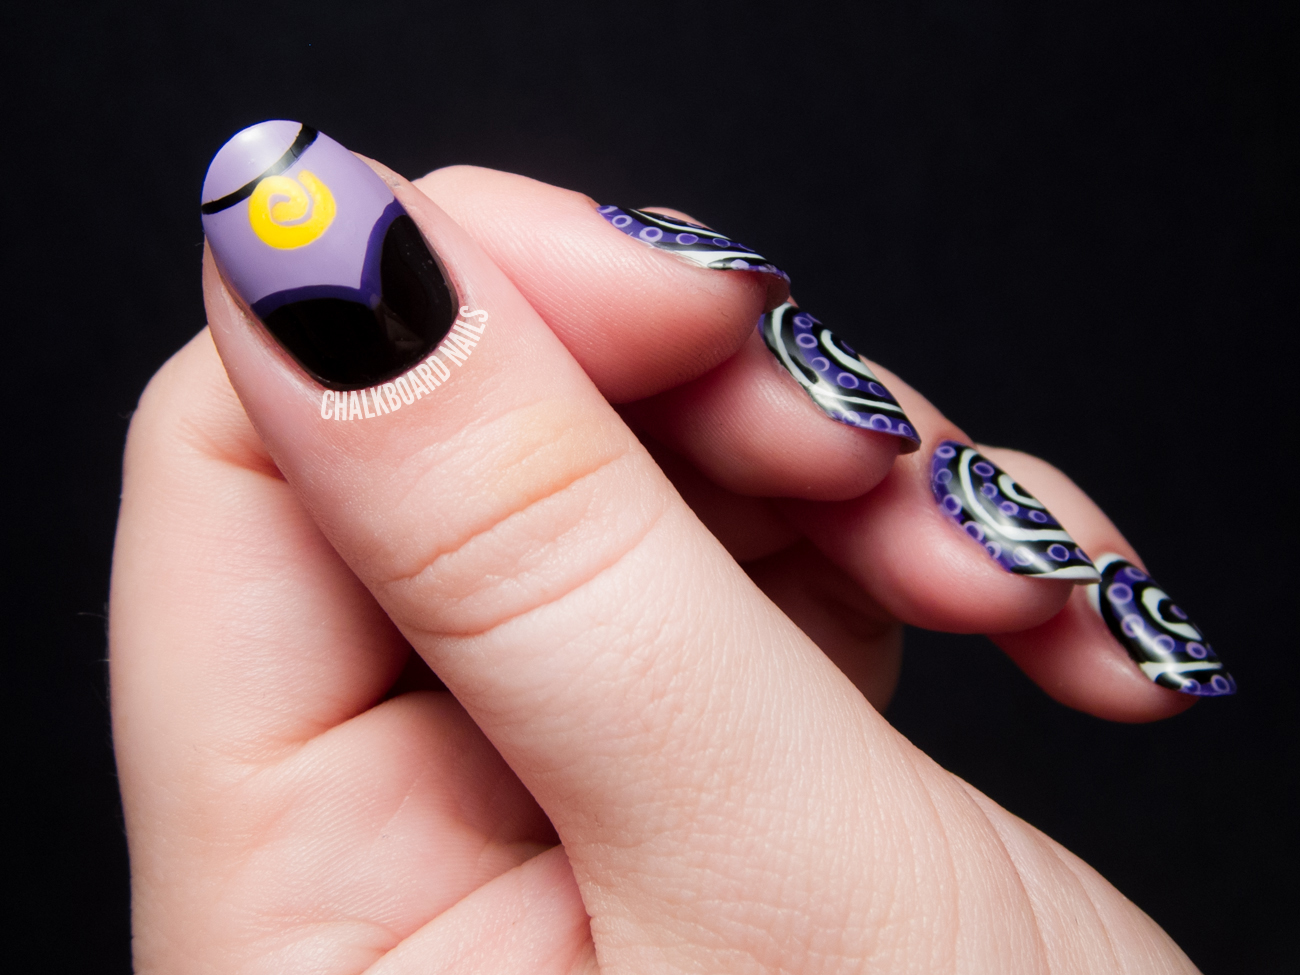 4. "Ursula Nail Art Tutorial Inspired by Disney's The Little Mermaid" - wide 5